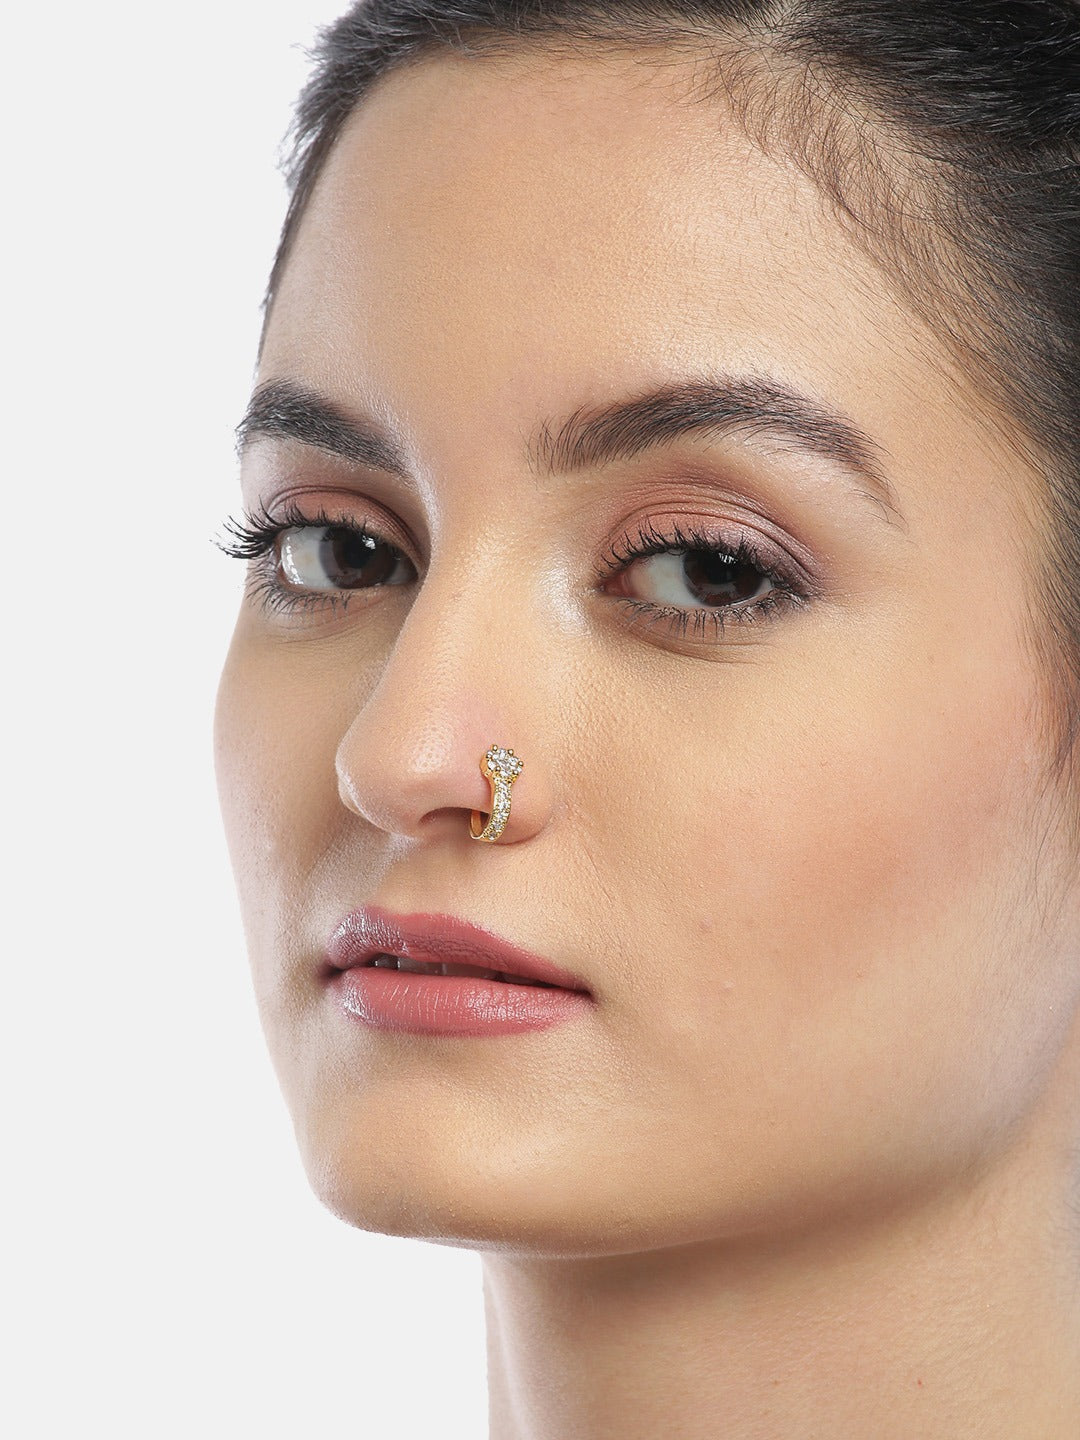 14K Solid Gold Septum Ring with Clicker 16g Nose Hoop Piercing Jewelry for  Women | eBay